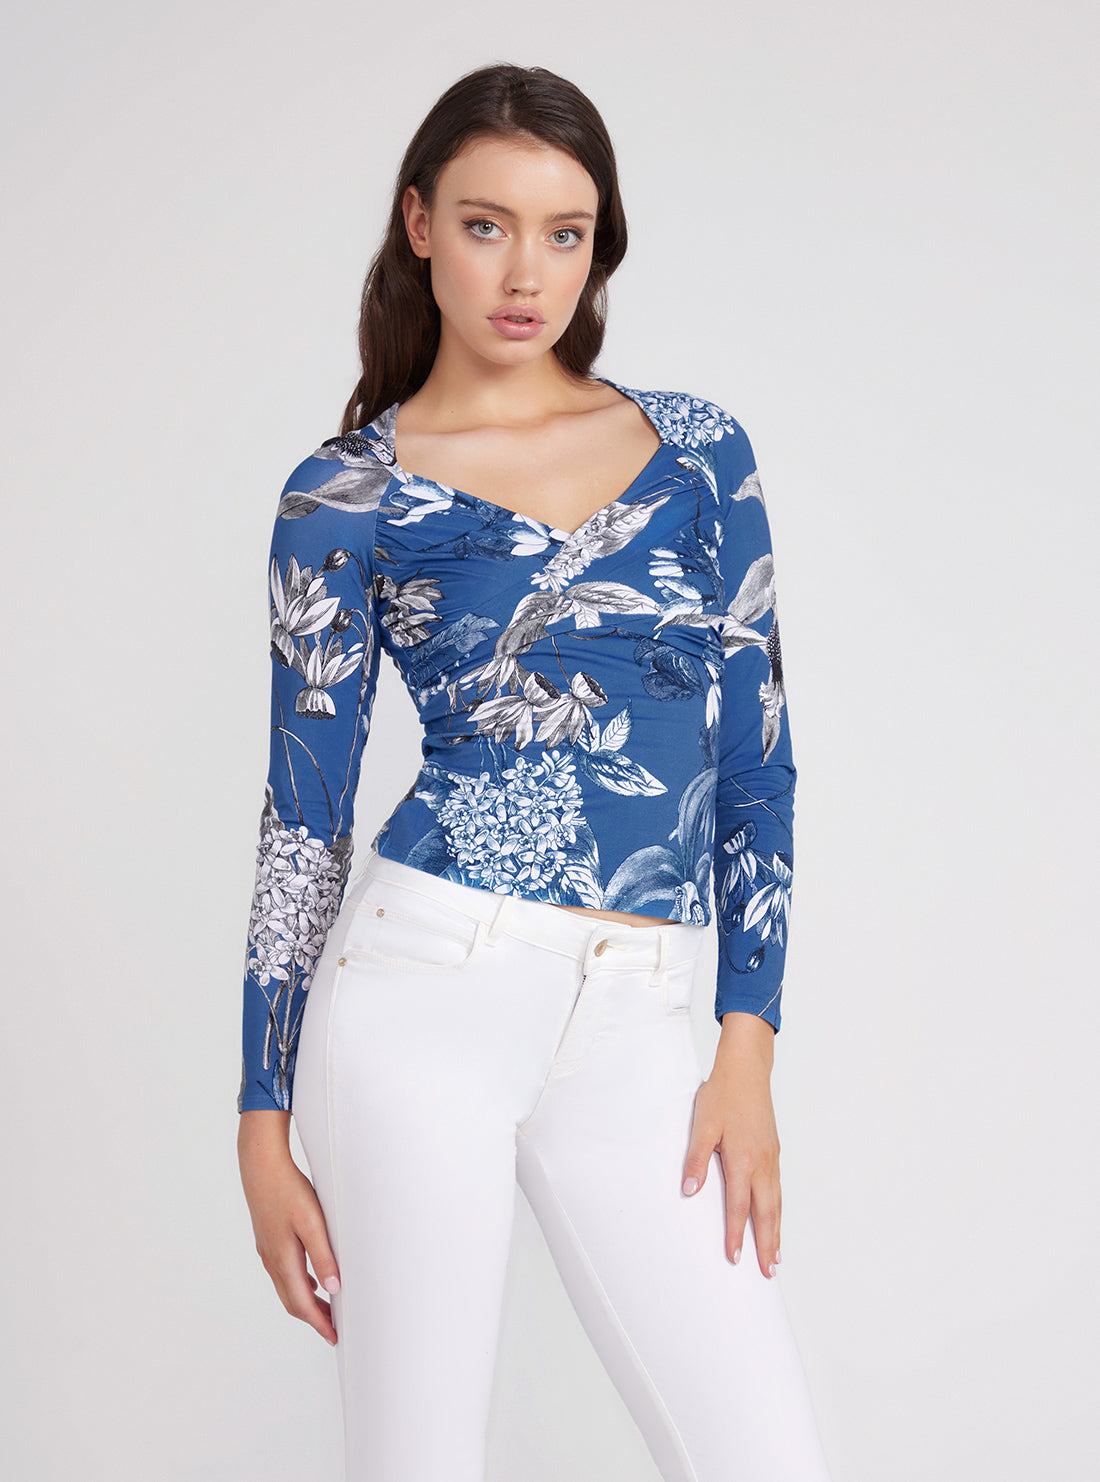 GUESS Blue Floral Print Dianna Long Sleeve Top front view